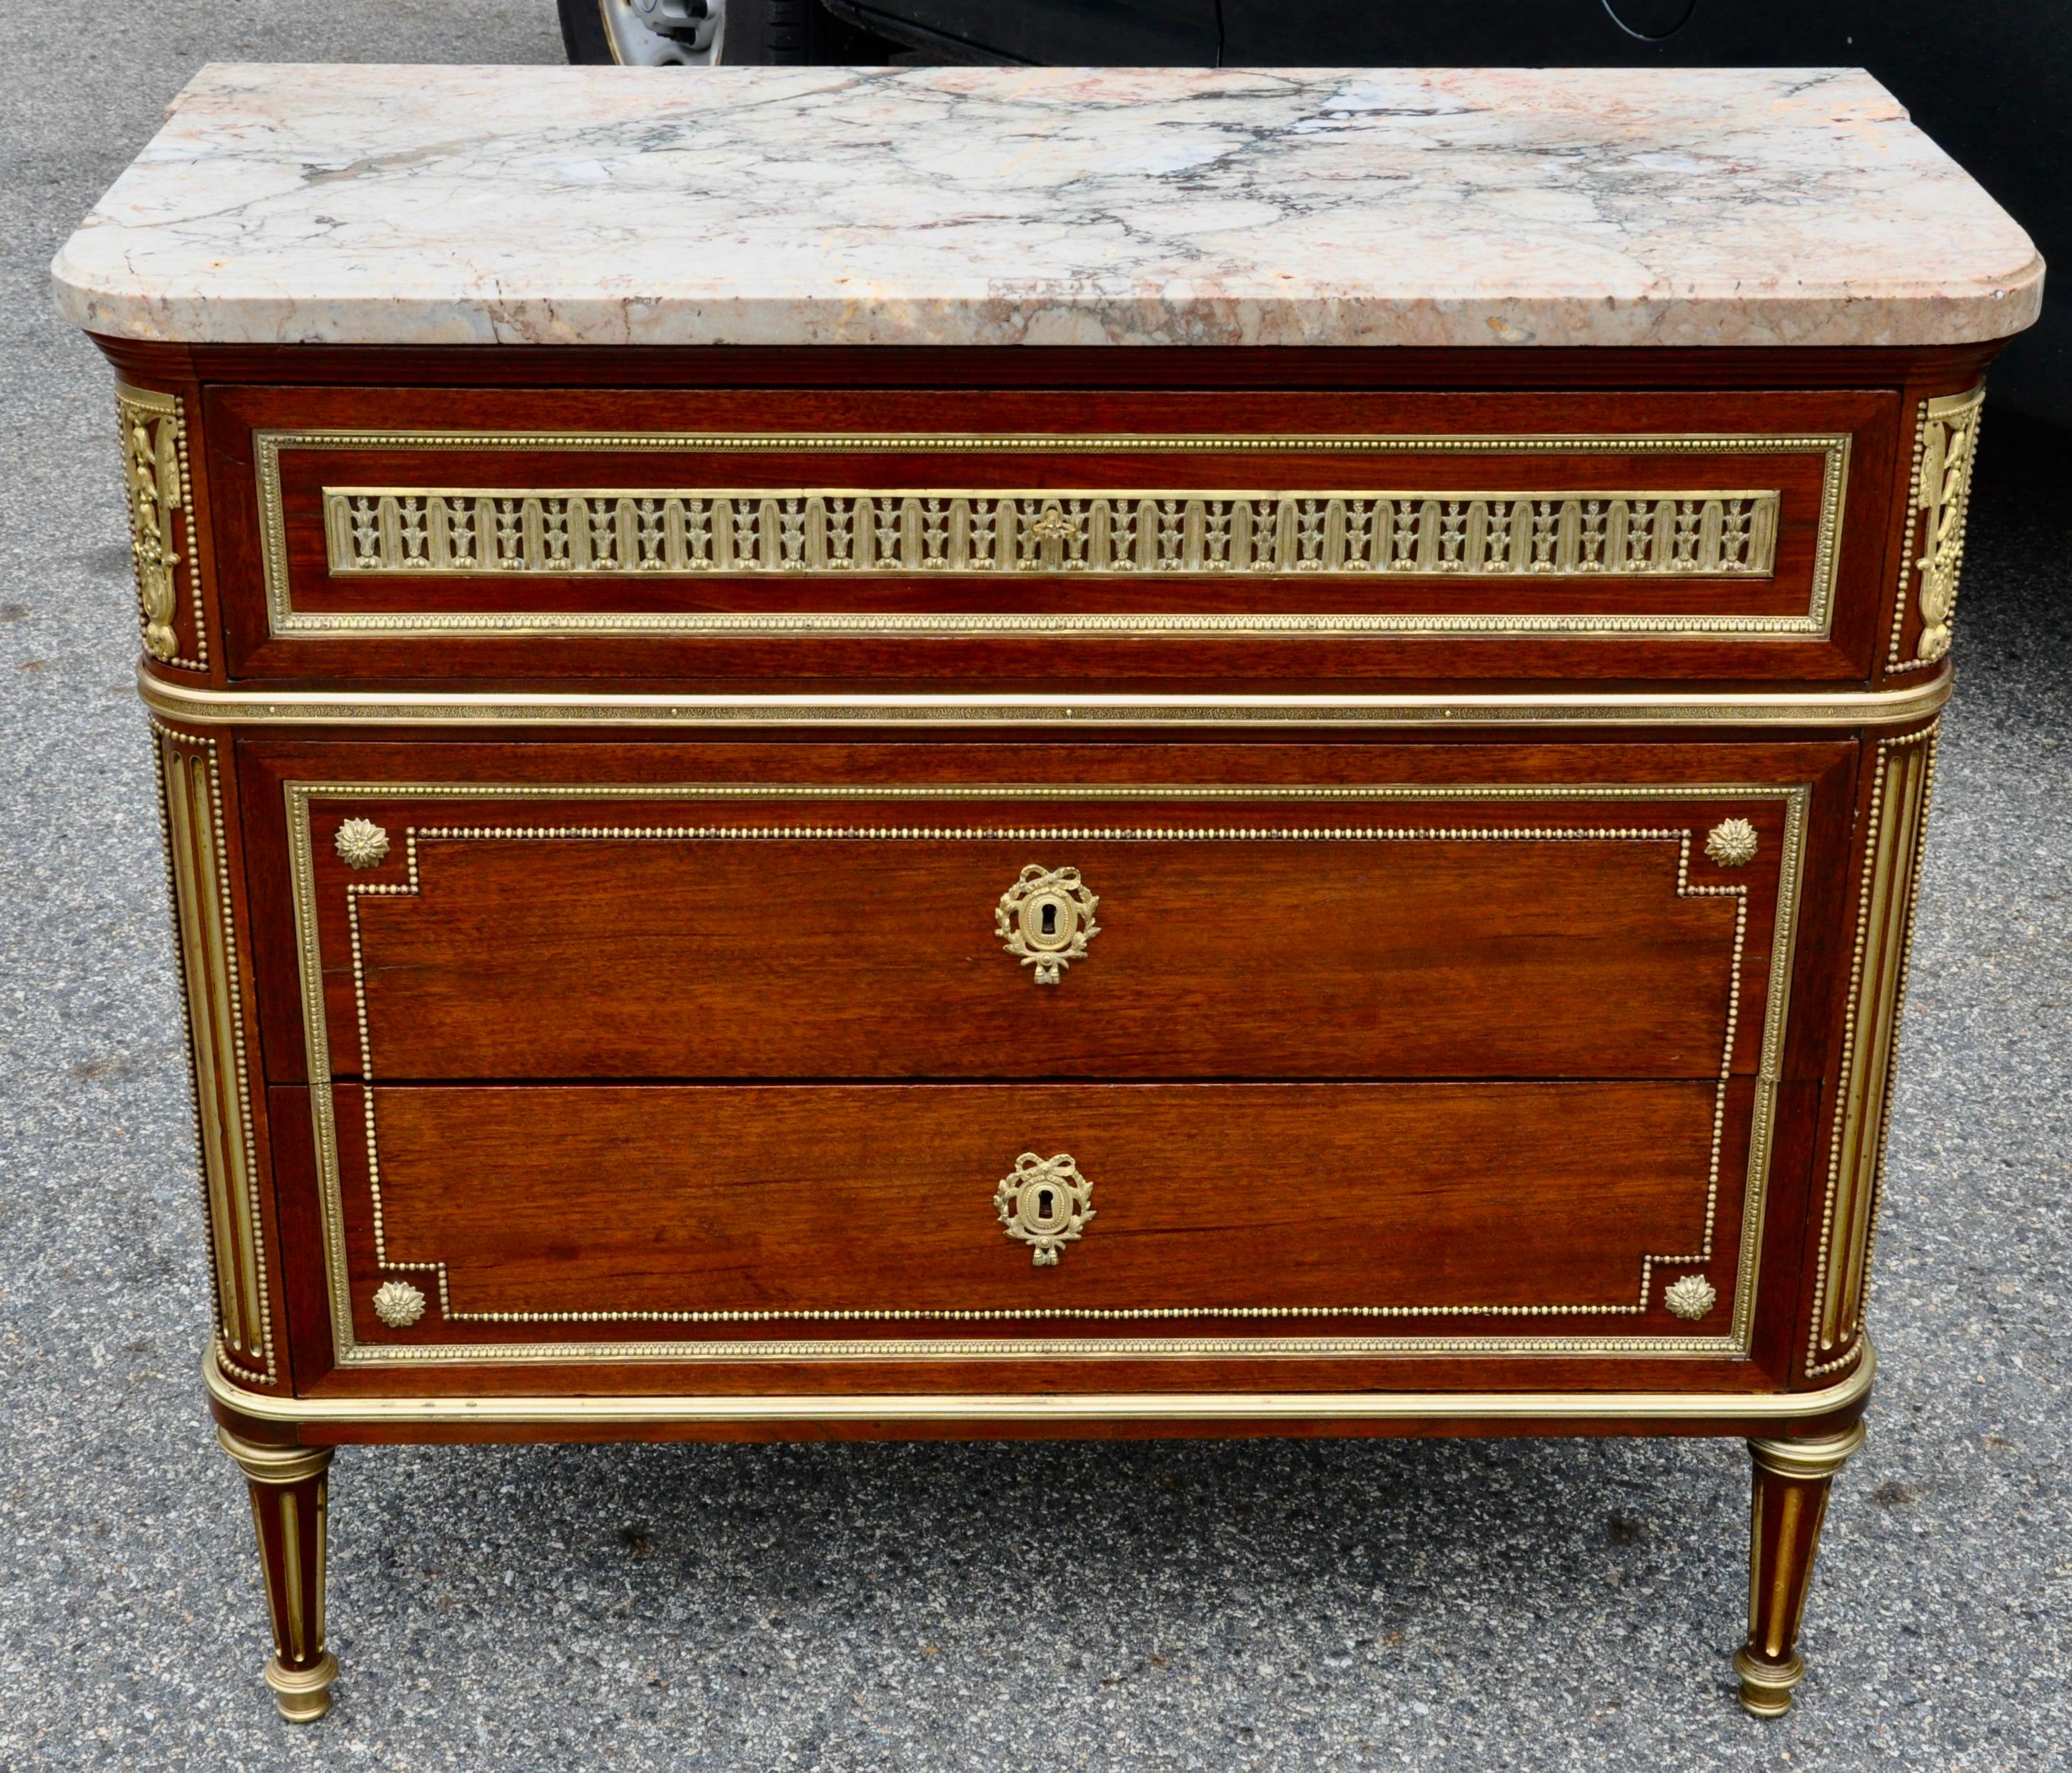 A very fine 19th Century Louis XVI style marble-top commode in the style of Paul Sormani. Original marble and mounts. Mahogany throughout with oak secondary wood. 